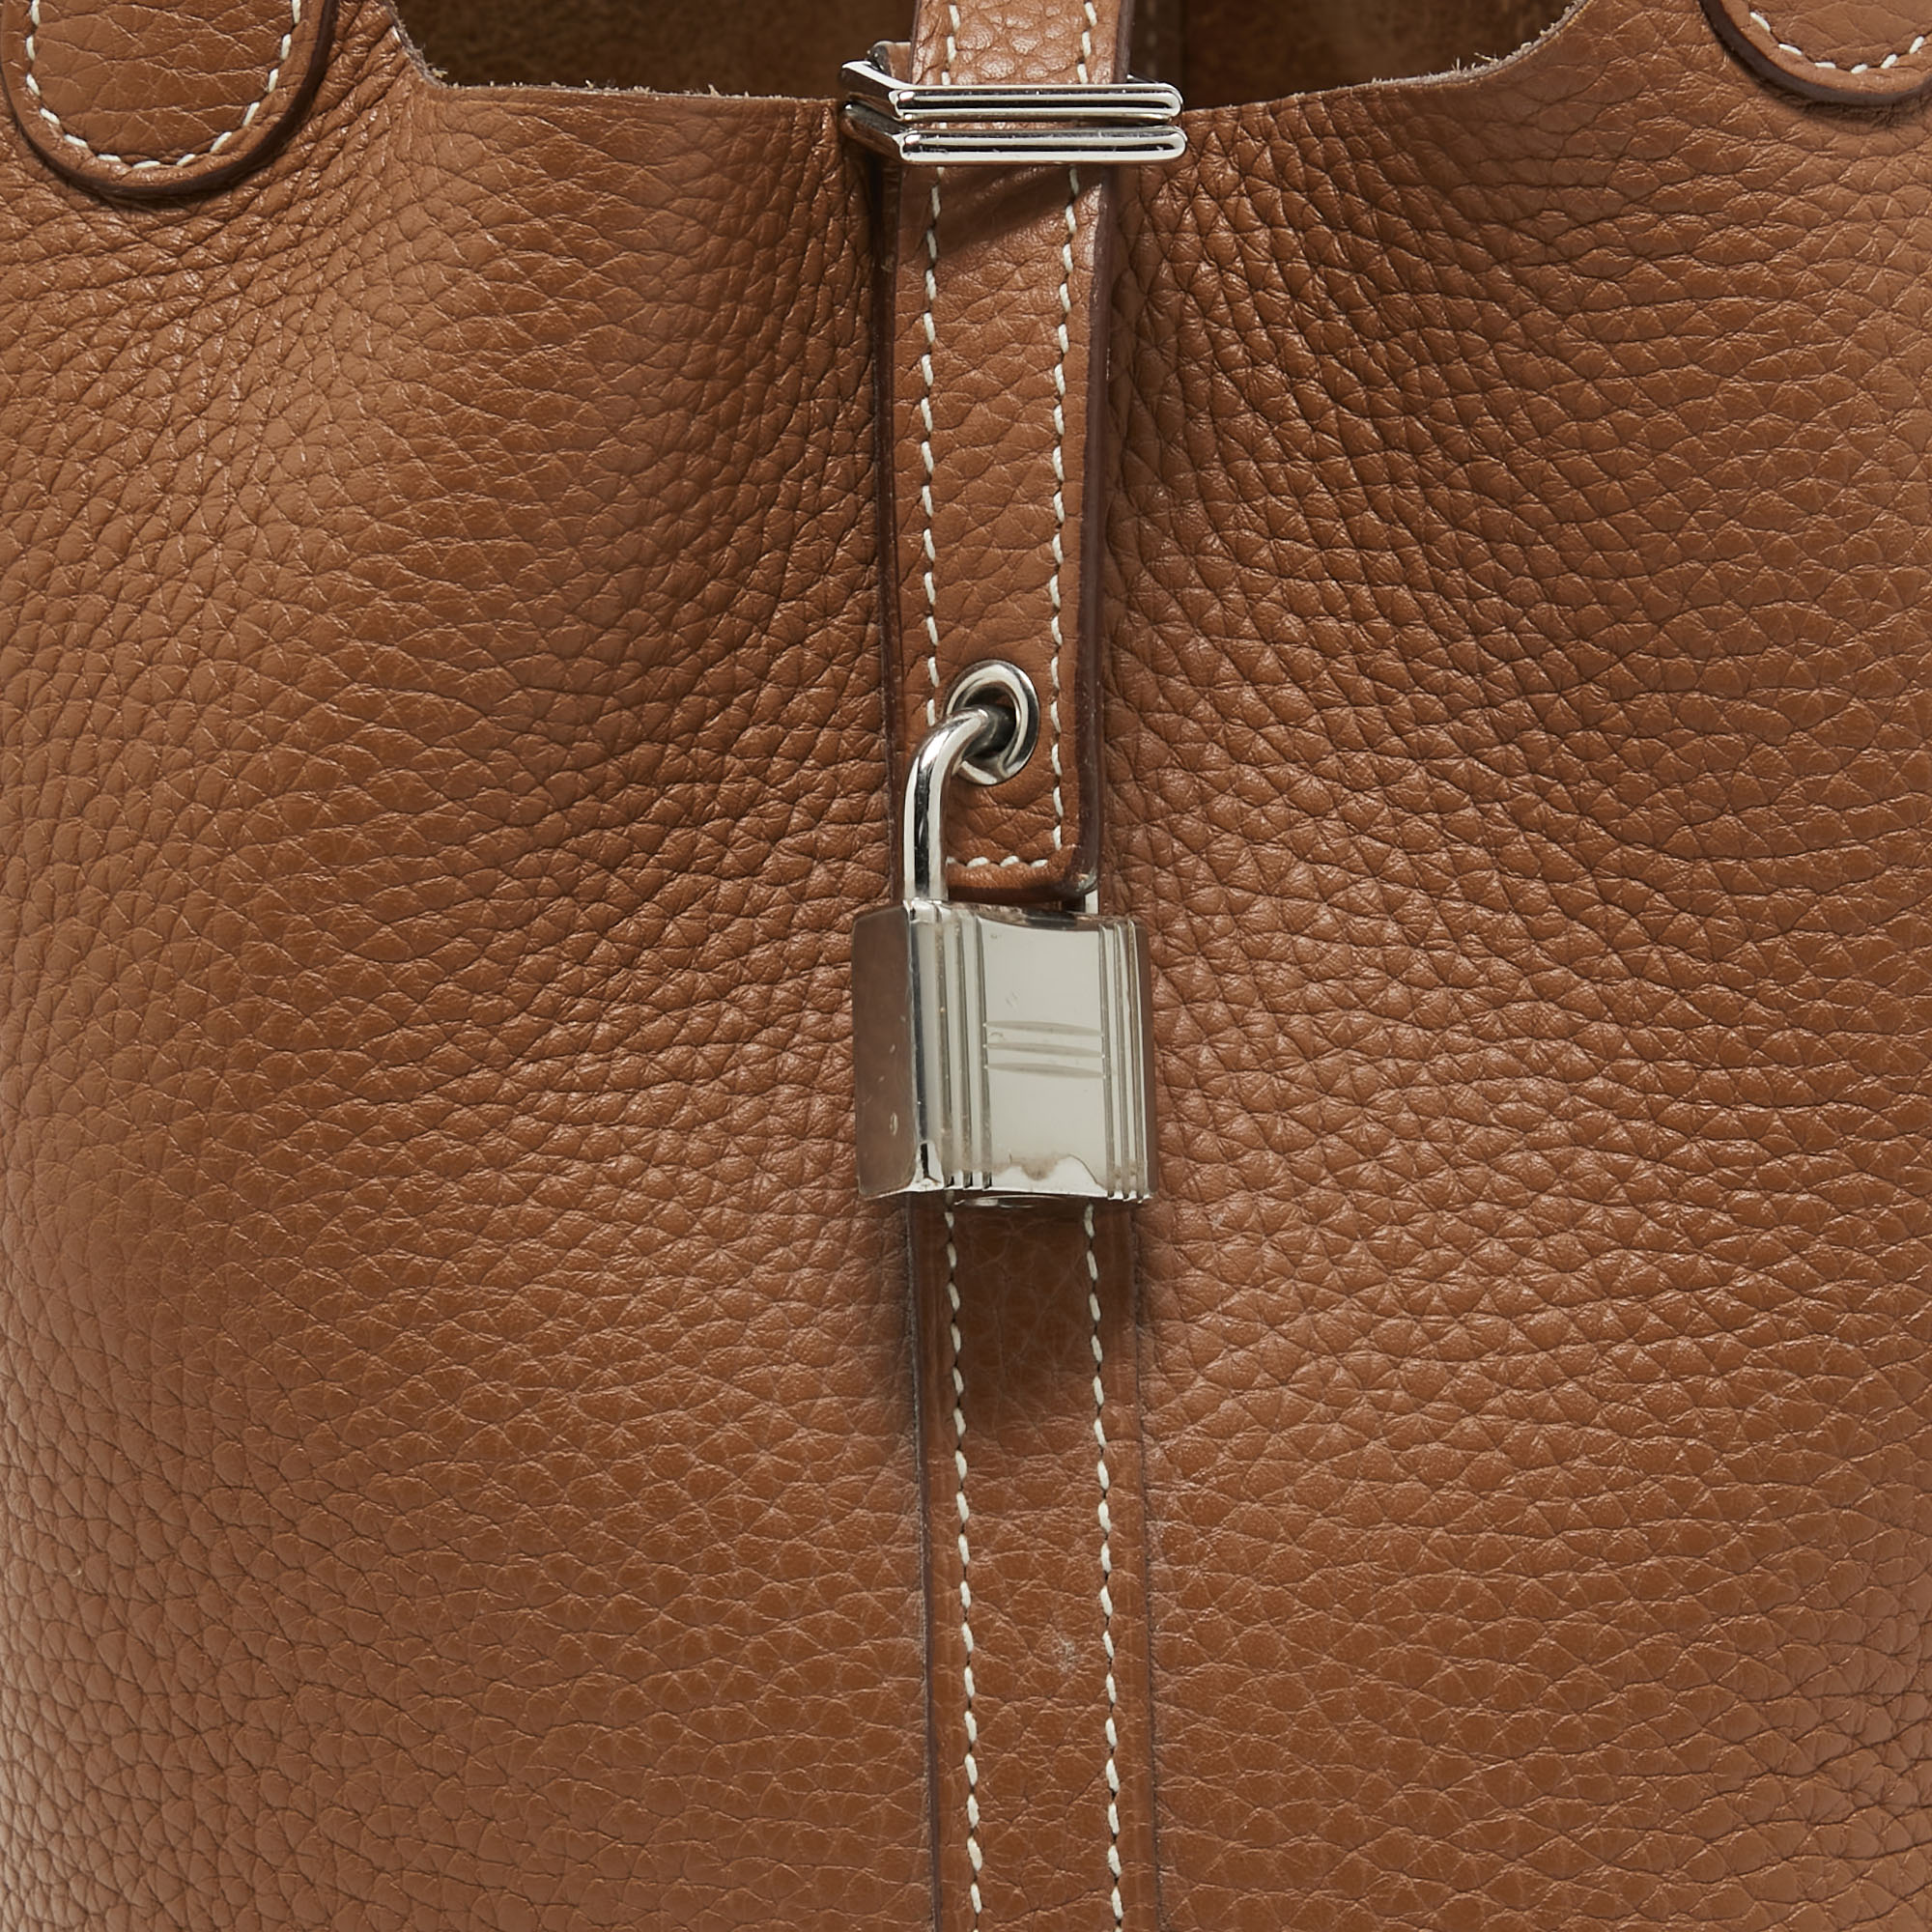 Hermes Gold Clemence Leather Picotin Lock 18 Bag